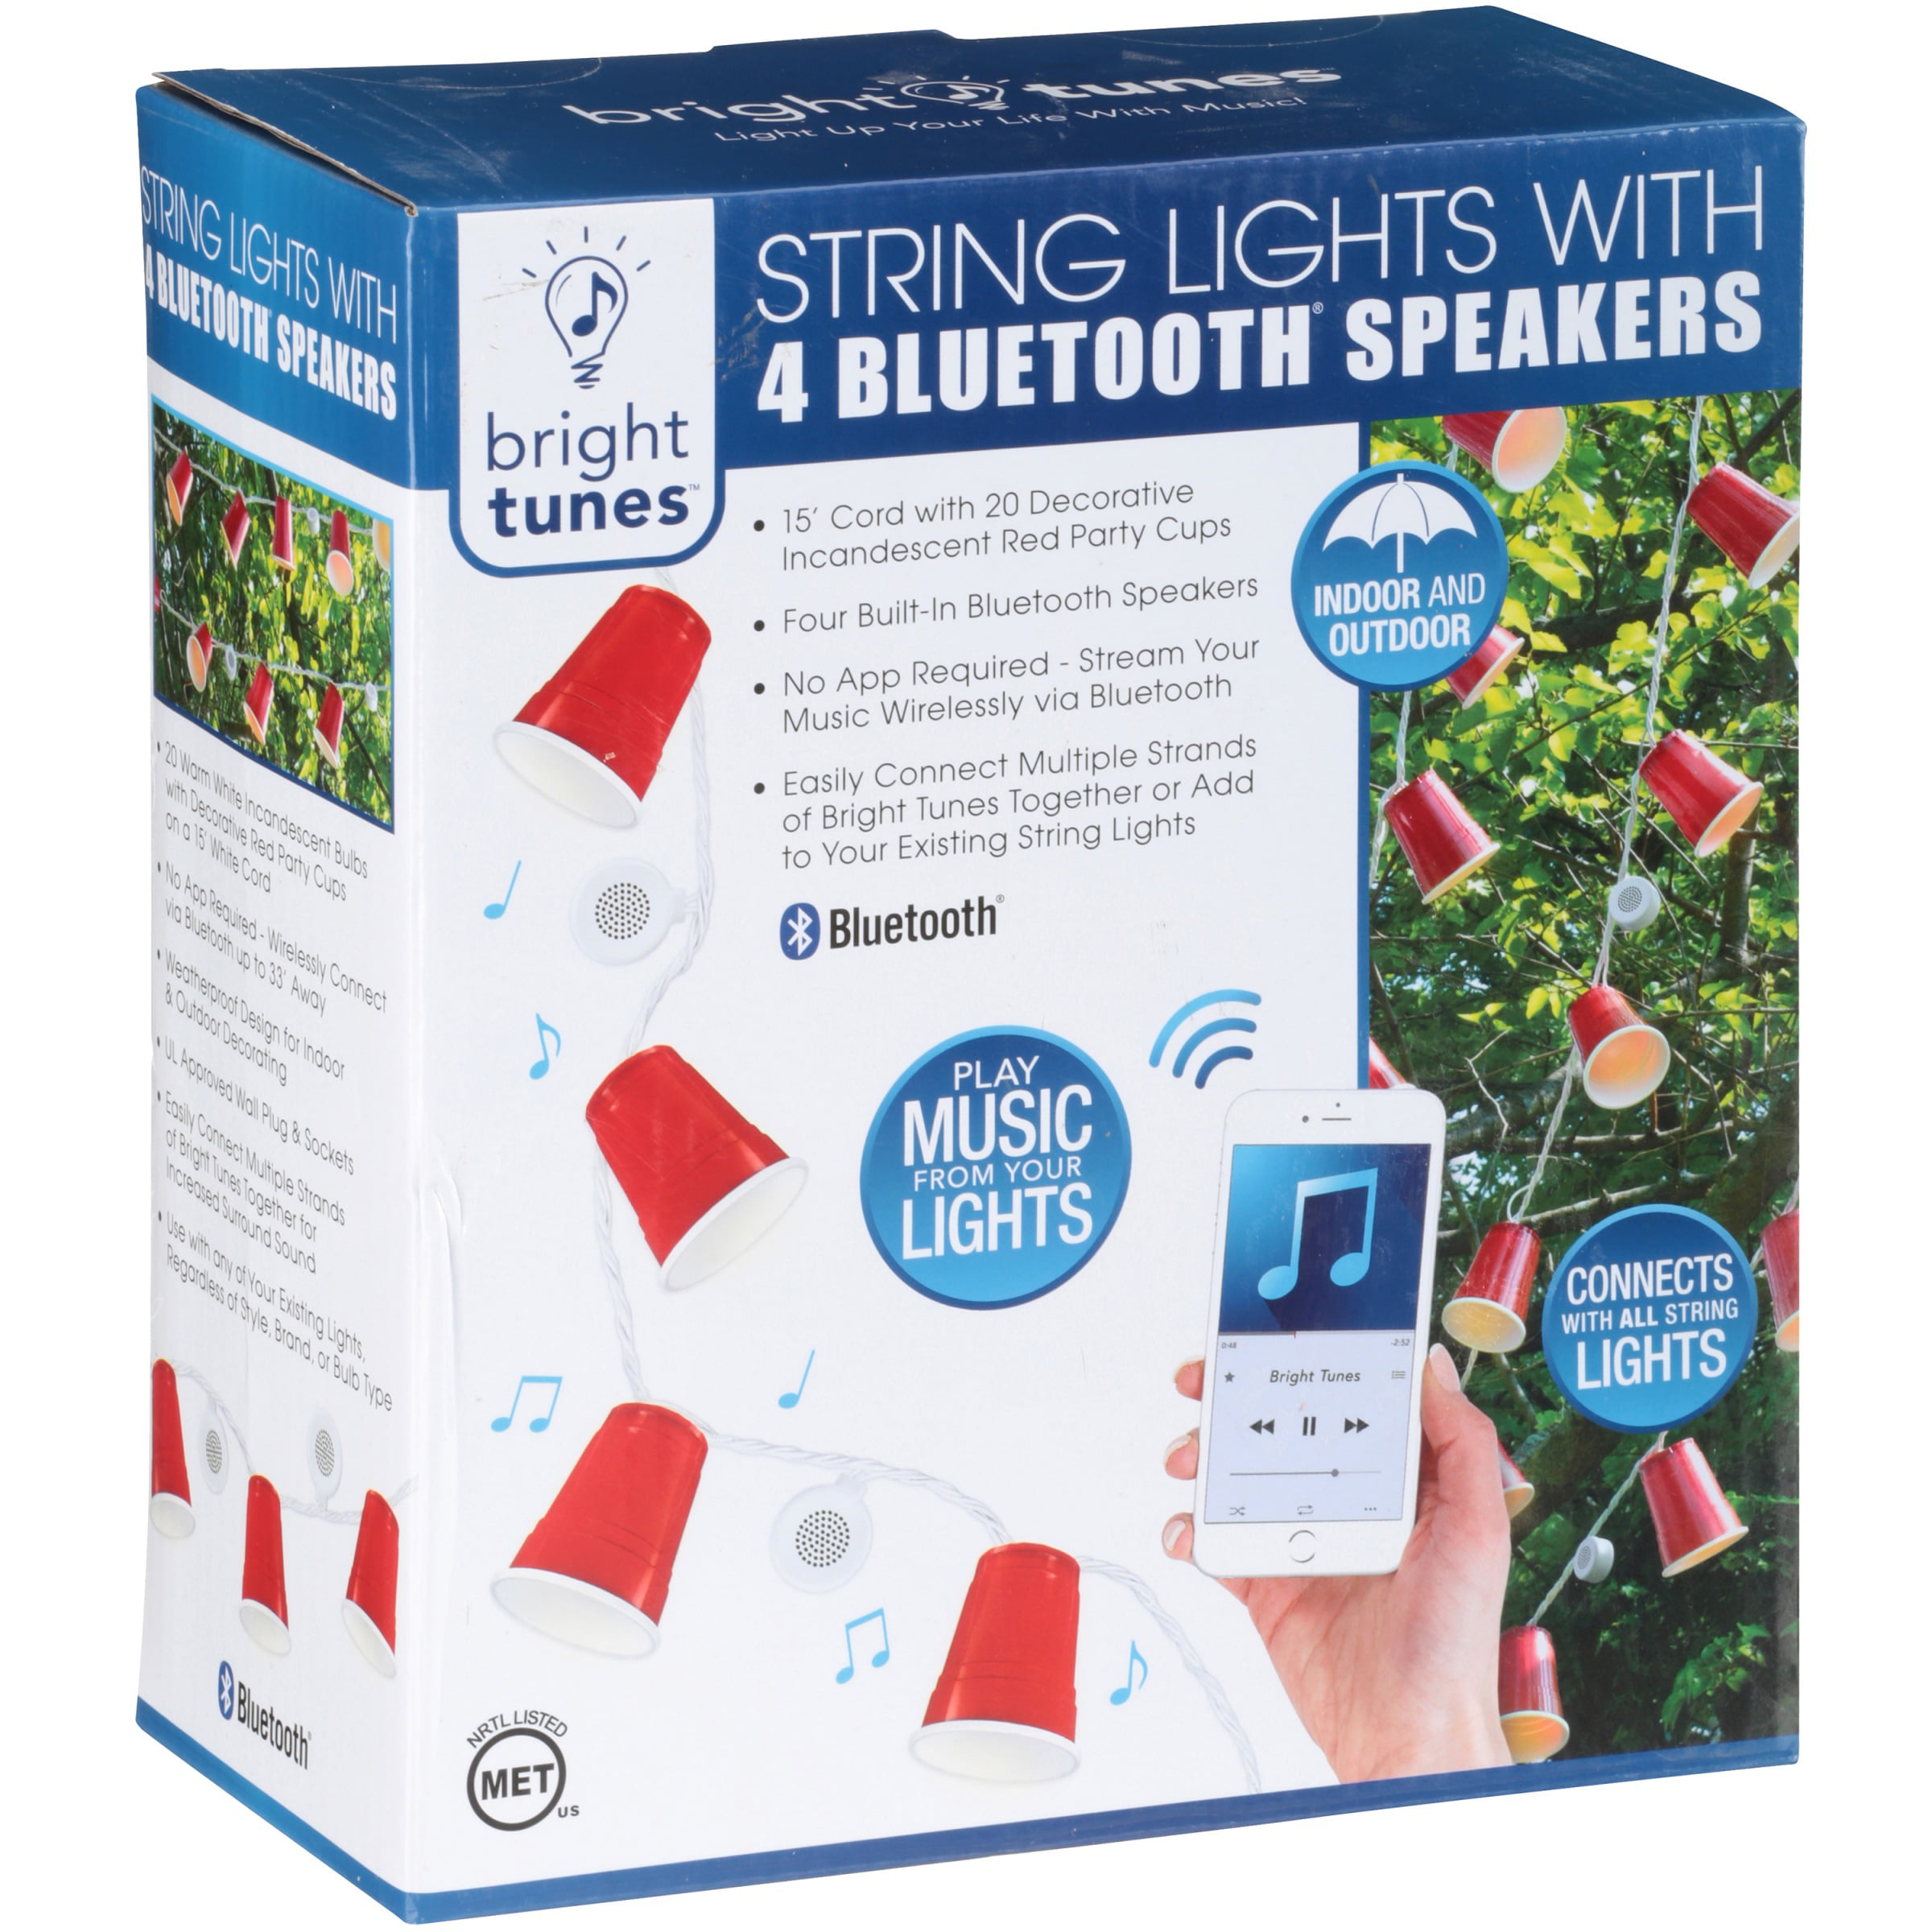 Warm White Bright Tunes string lights with 4 Bluetooth speakers 